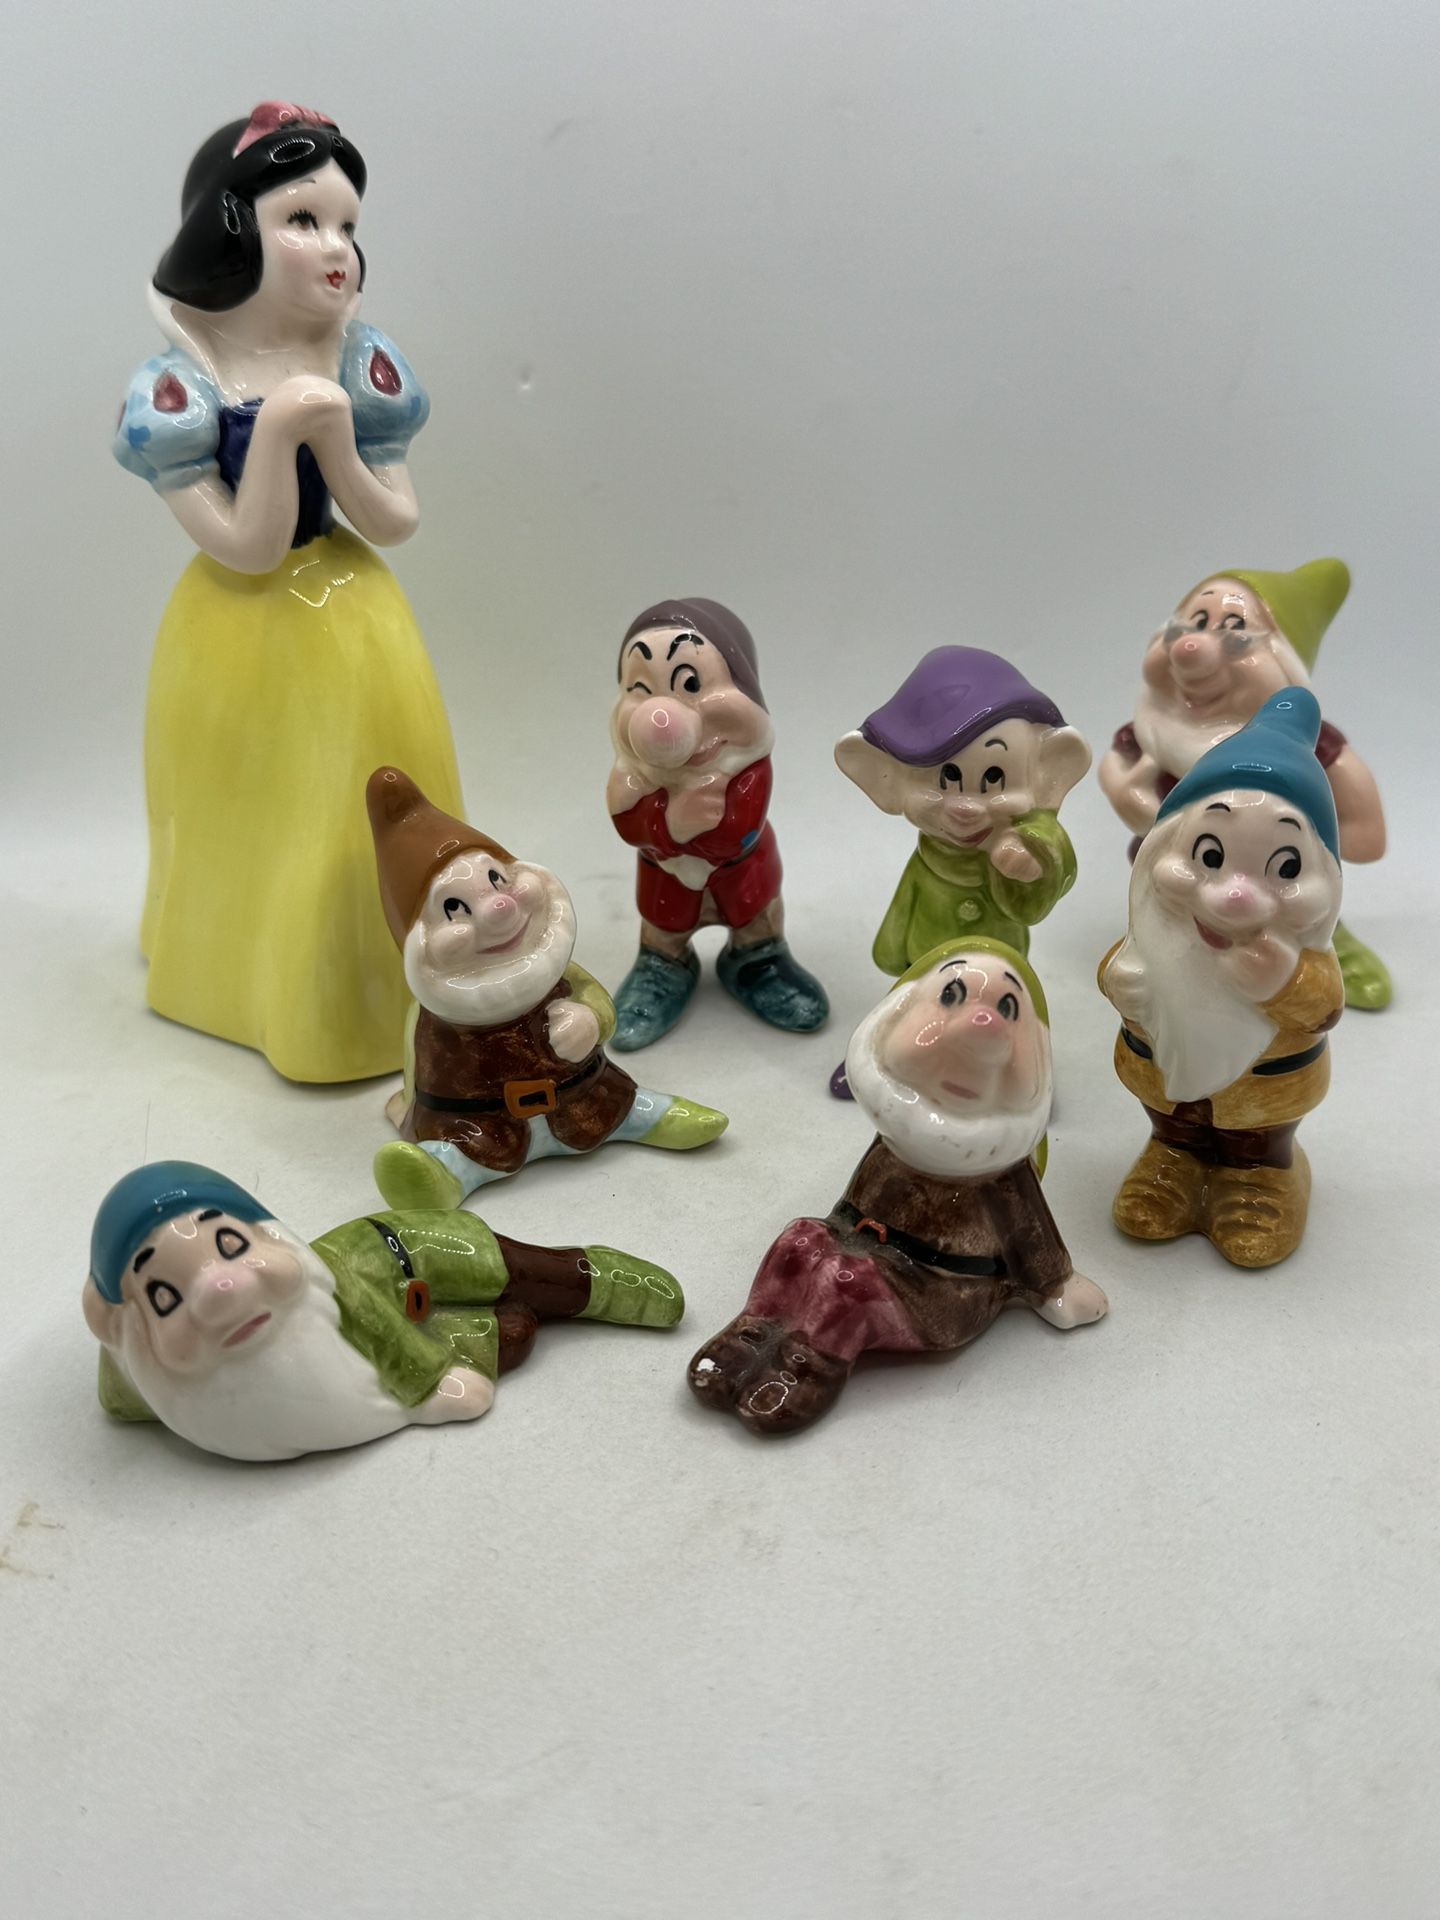 Vintage Walt Disney Snow White and the Seven Dwarfs Figurines • Ceramic • Japan. Snow White is approximately 6”, and the doors are approximately 3”. V